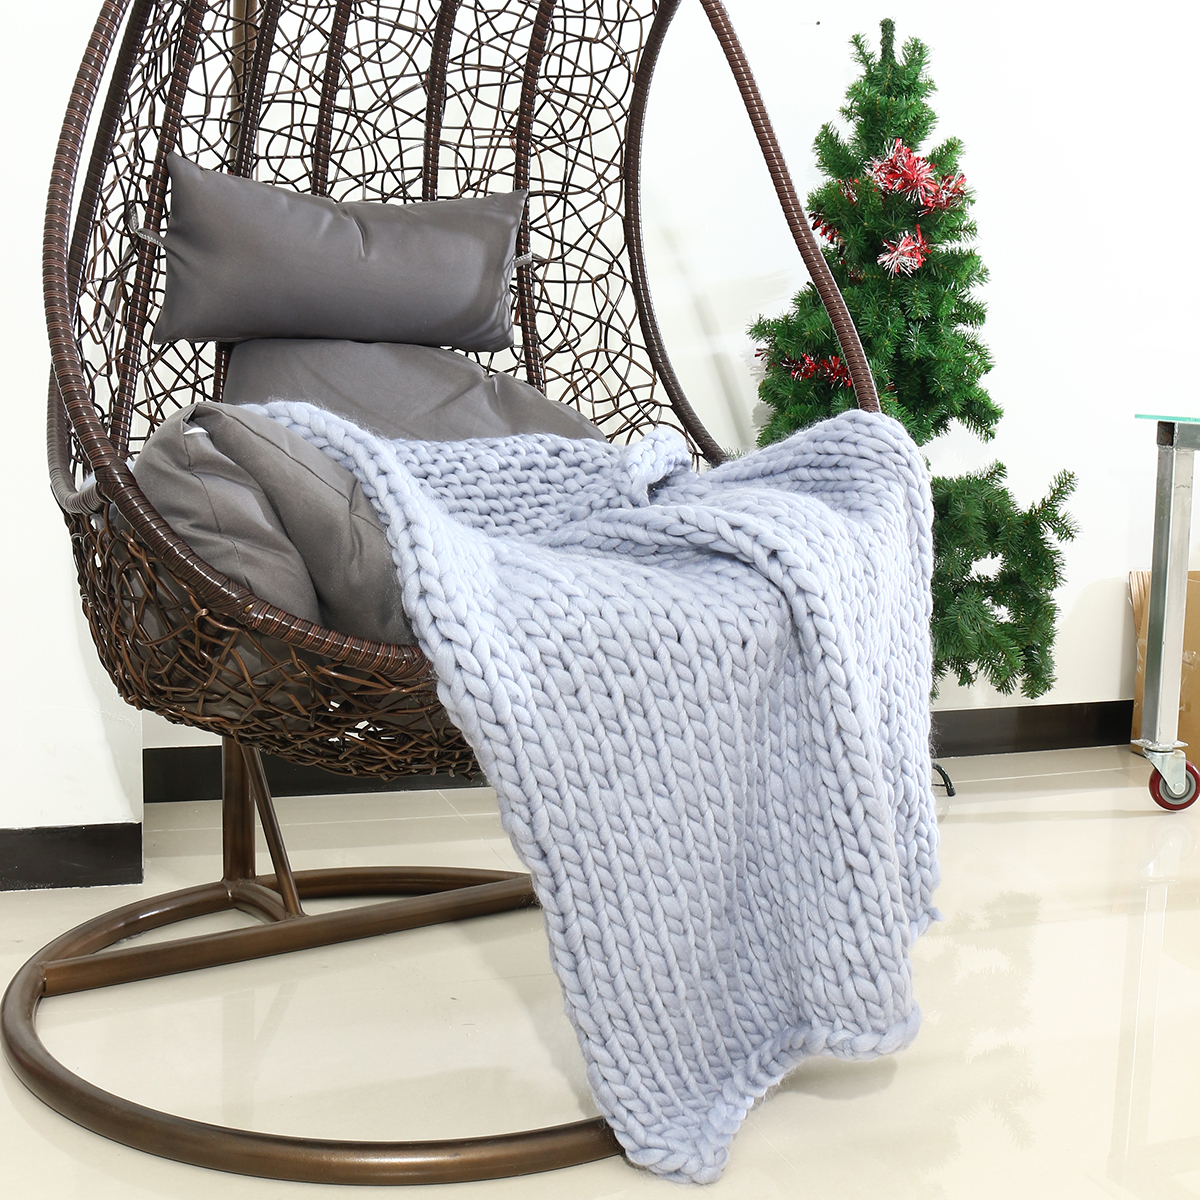 80x100CM-Handmade-Polyester-Fiber-Knitted-Blanket-Pure-Air-Conditioning-Bulky-Knitting-Throw-Blanket-1800712-3